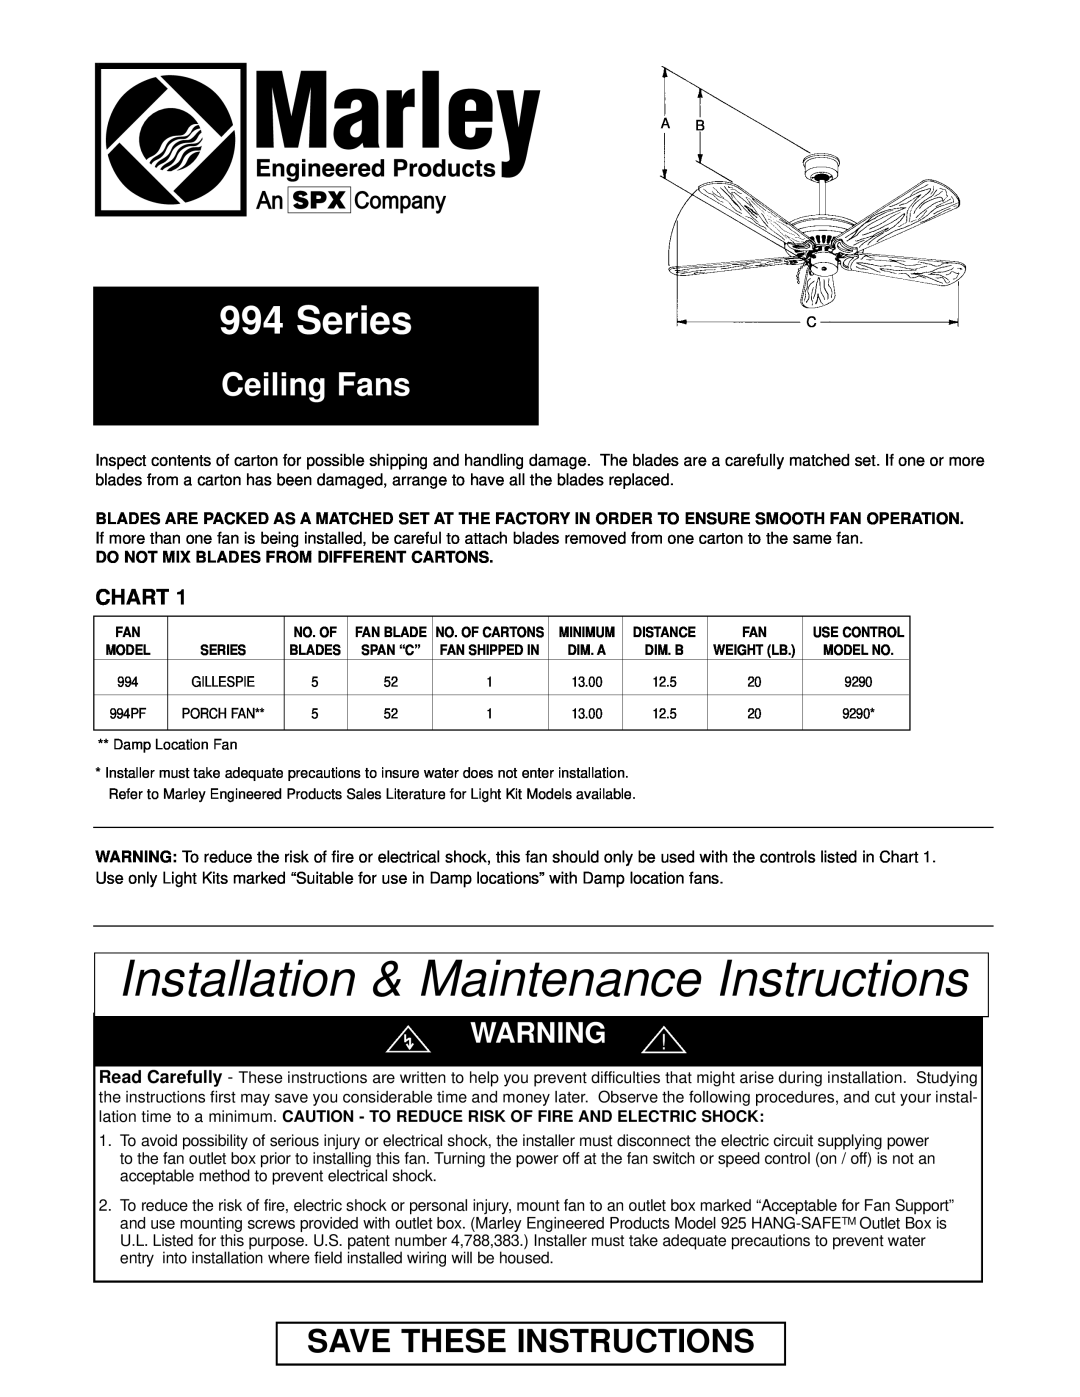 Marley Engineered Products 994 manual Save These Instructions, Chart, Installation & Maintenance Instructions, Series 